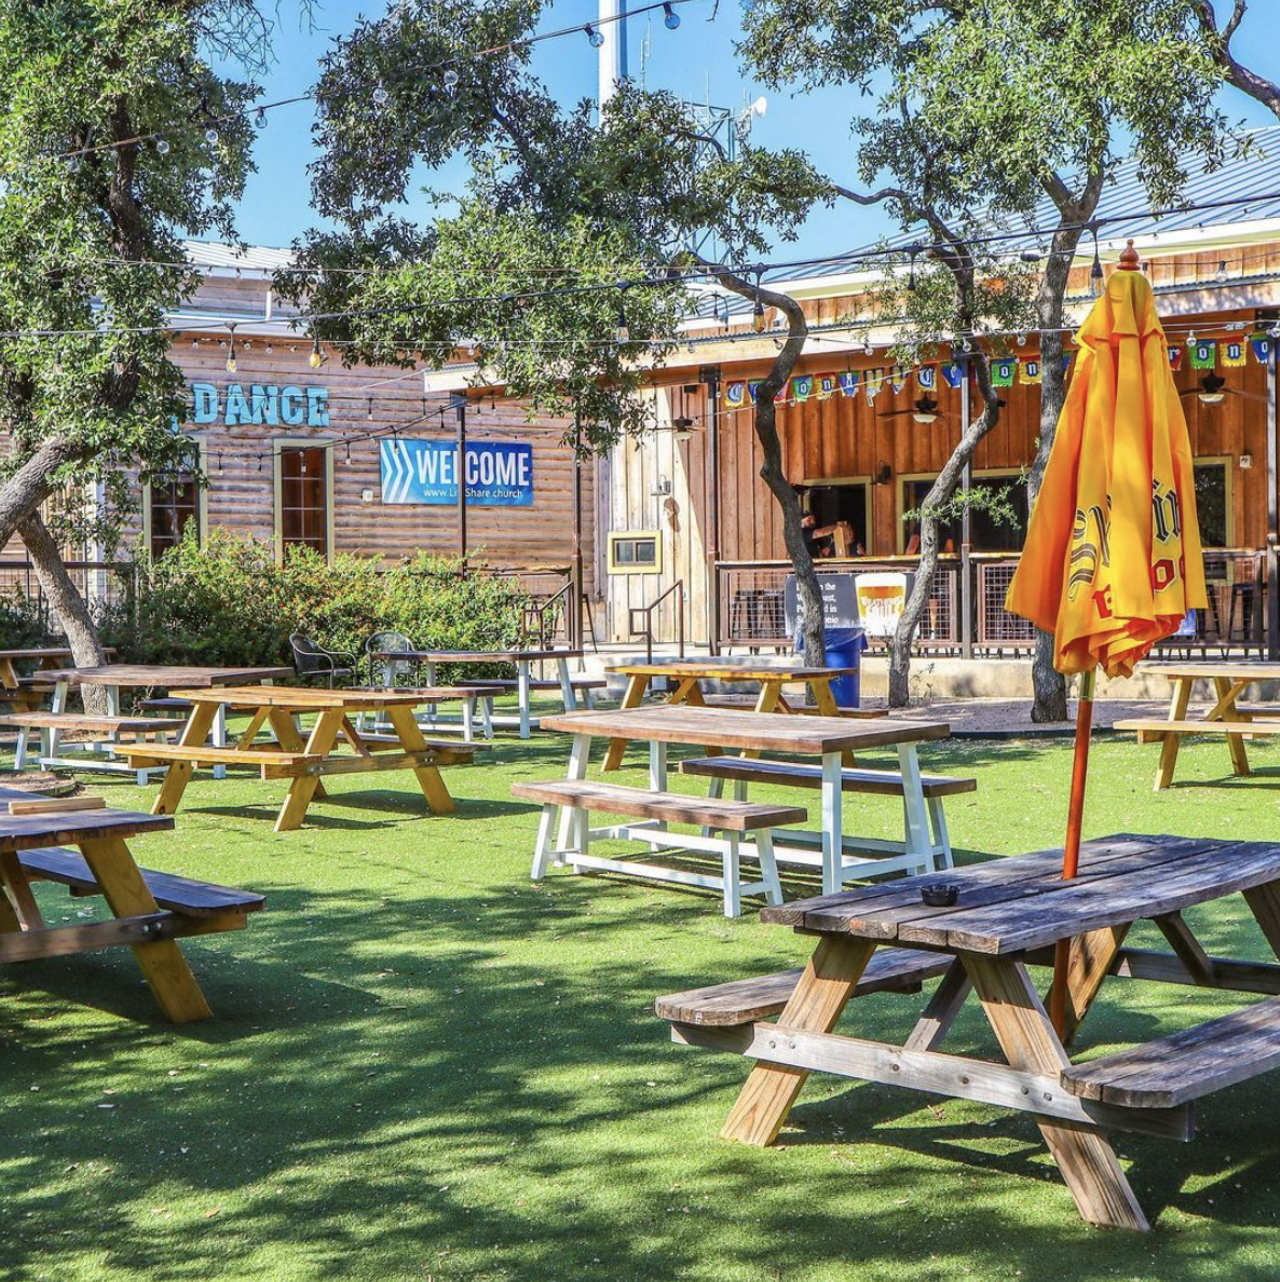 The Well
Mask Required
5539 UTSA Blvd, (210) 877-9099, thewellsanantonio.com
Enjoy a casual Texas experience at The Well, where you and your furry friend can lounge at sun-bathed picnic tables. Snag a marg and a bowl if ice-cold H20 for your pup.
Photo via Instagram / thewellsanantonio